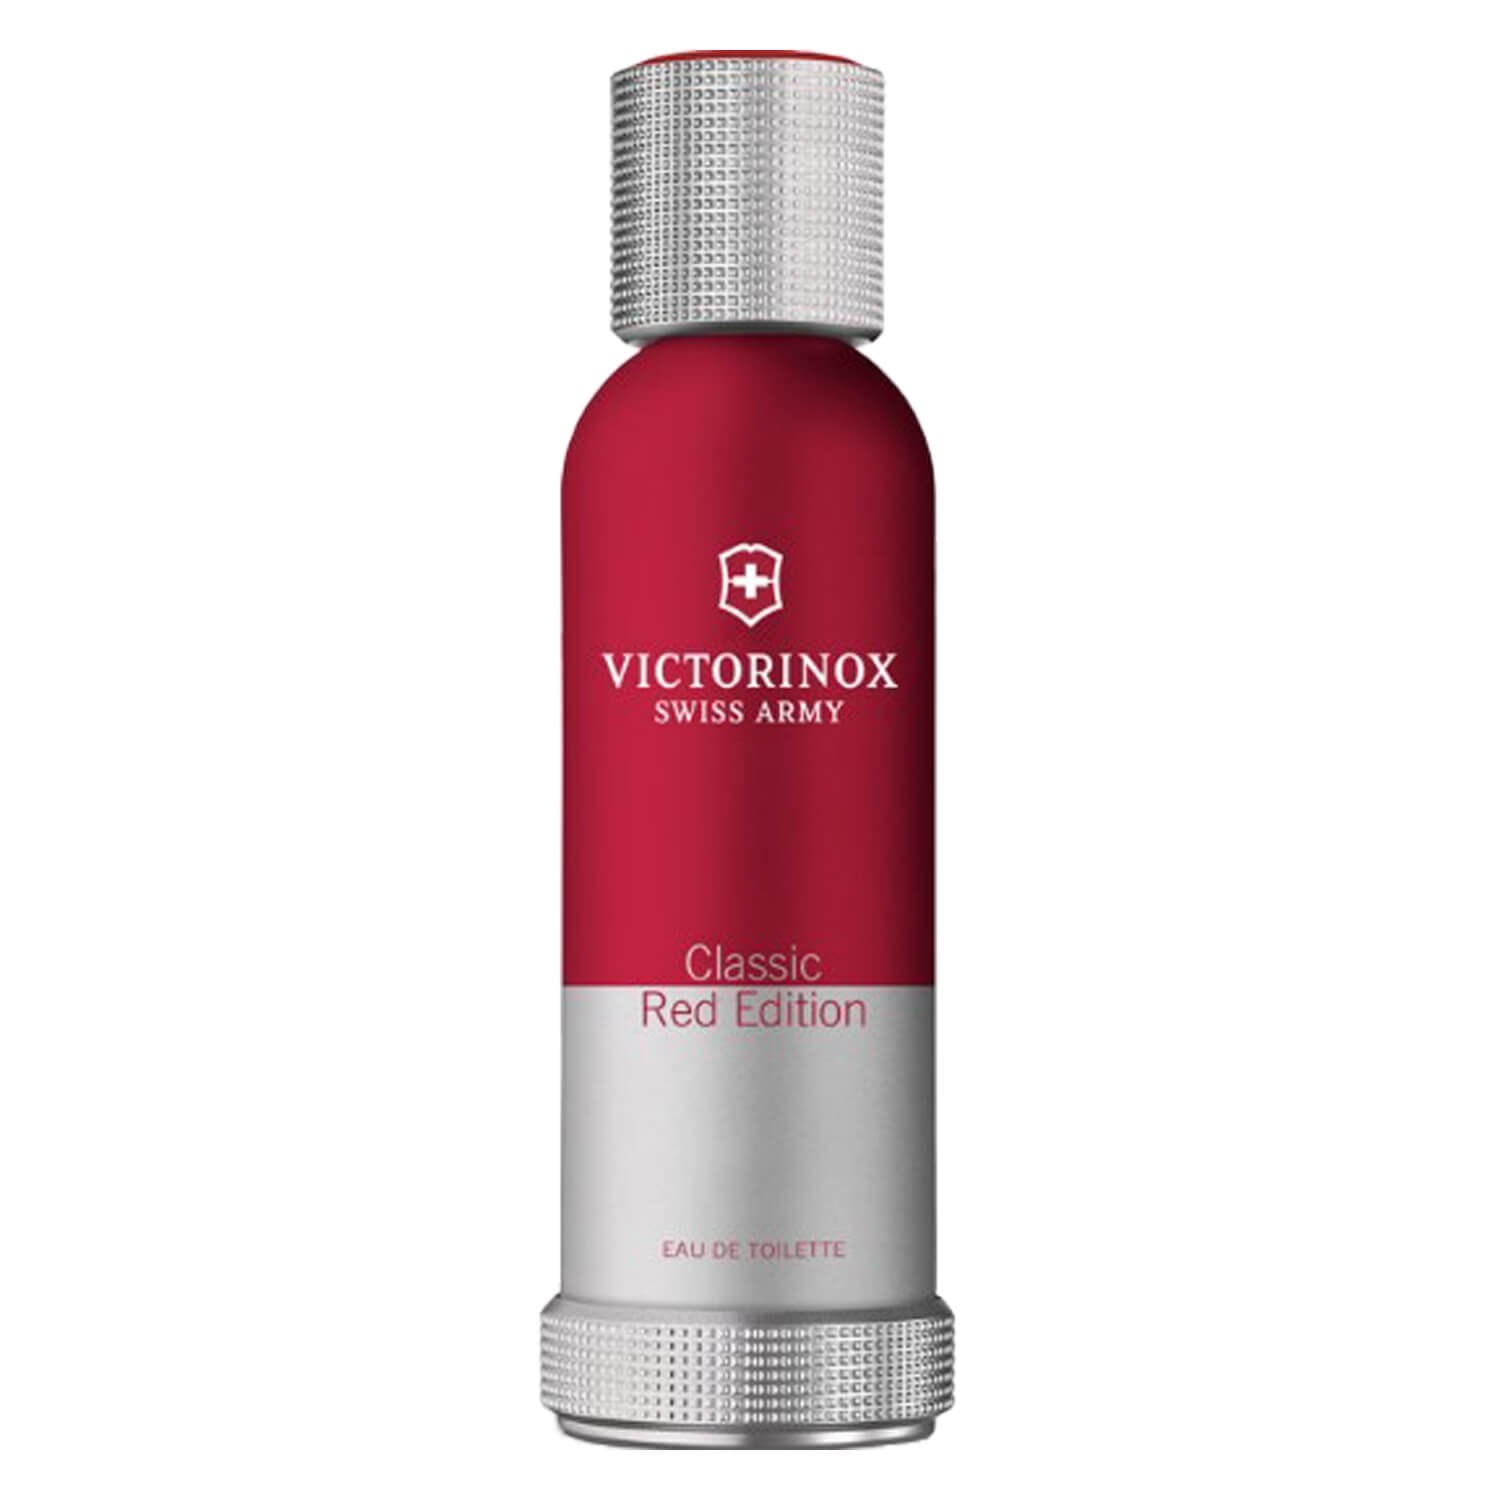 Product image from Victorinox Swiss Army - Classic Red Edition Eau de Toilette